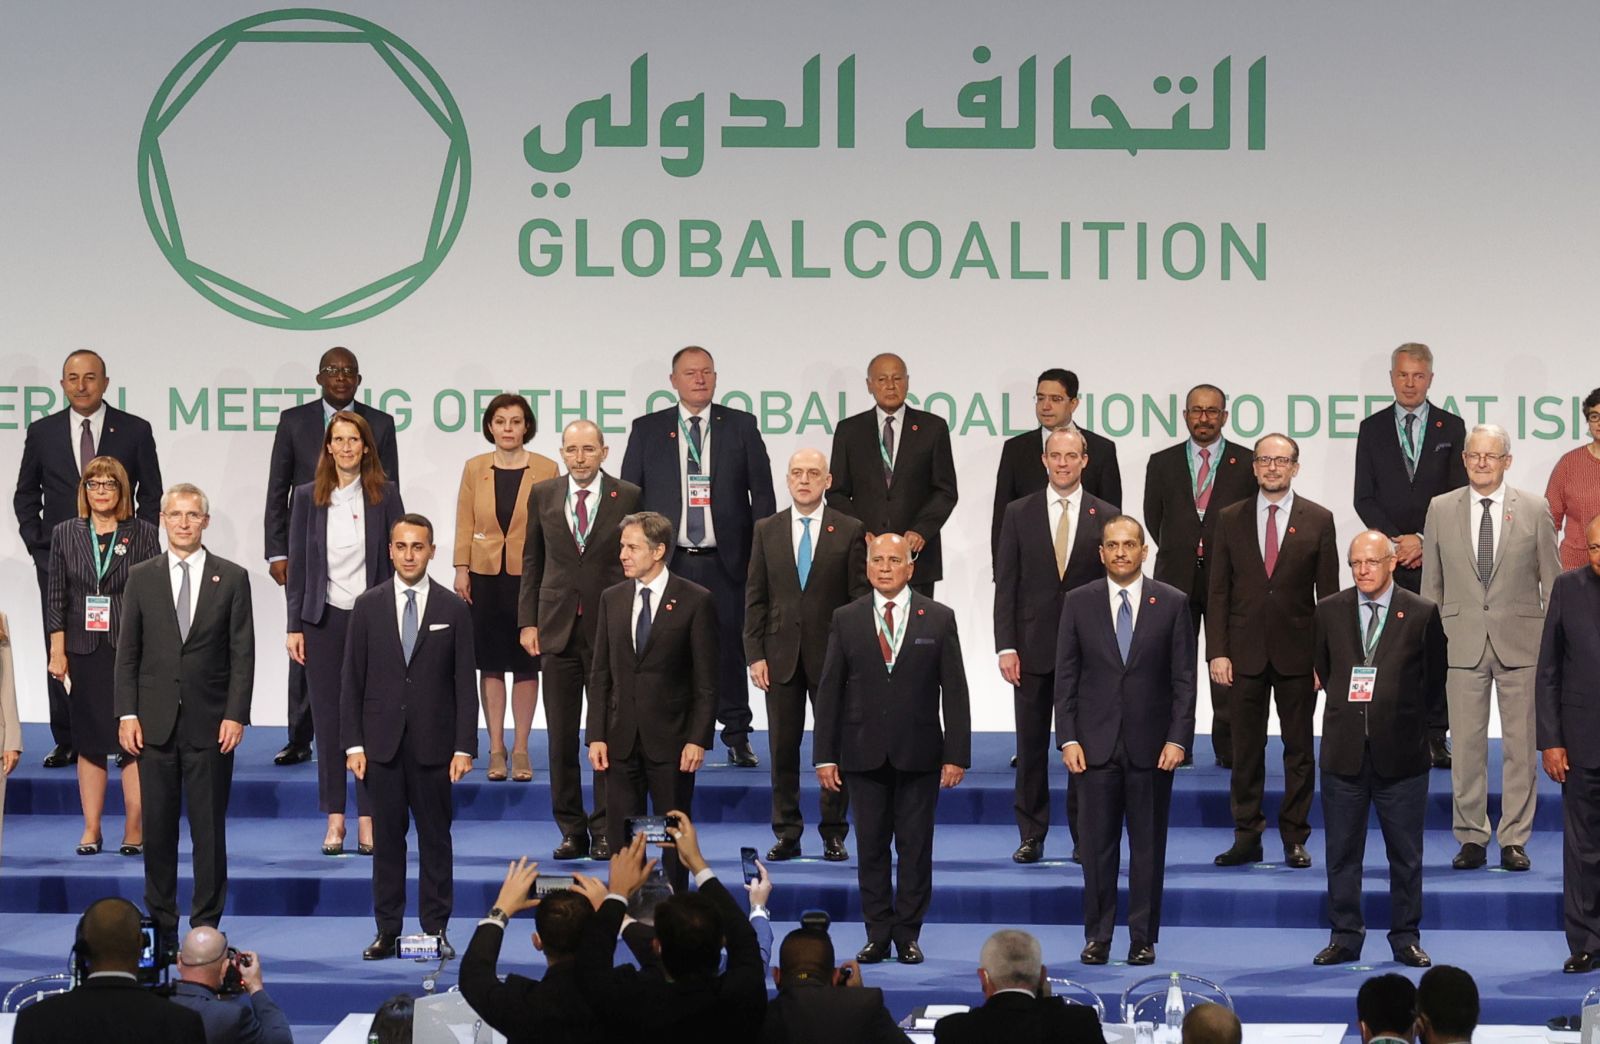 epa09307455 Dignitaries line up for a family photo during the G20 Ministerial Meeting of the Global Coalition to Defeat ISIS (Islamic State, IS) in Rome, Italy, 28 June 2021.  EPA/GIUSEPPE LAMI